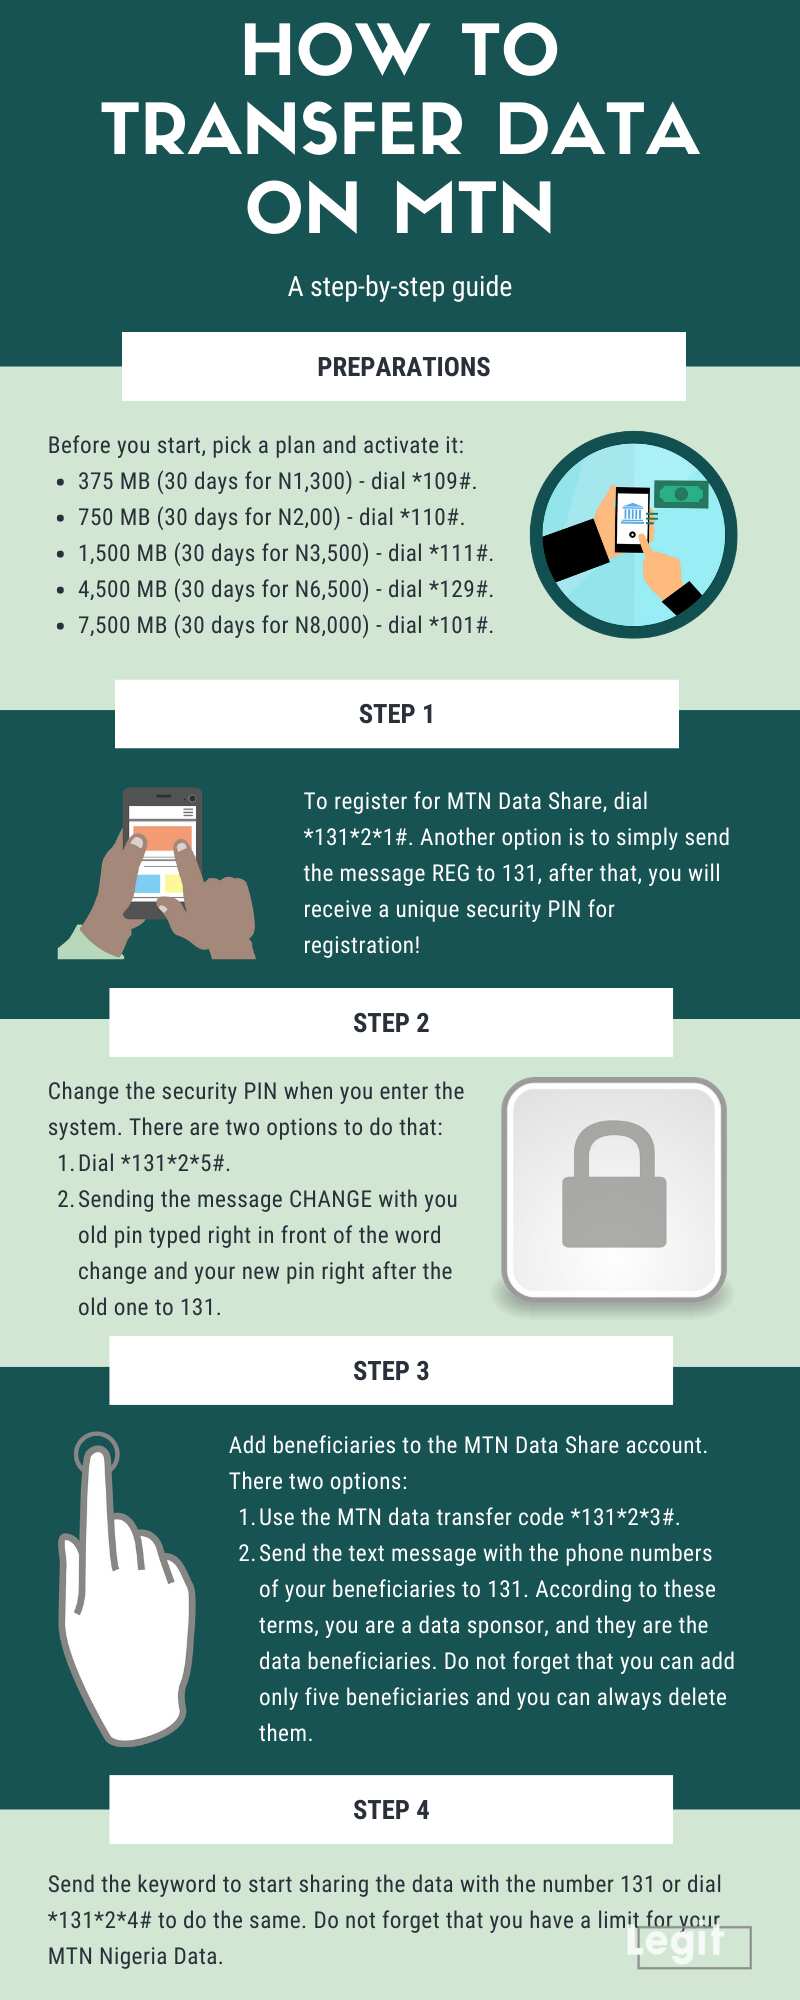 How to transfer data on MTN